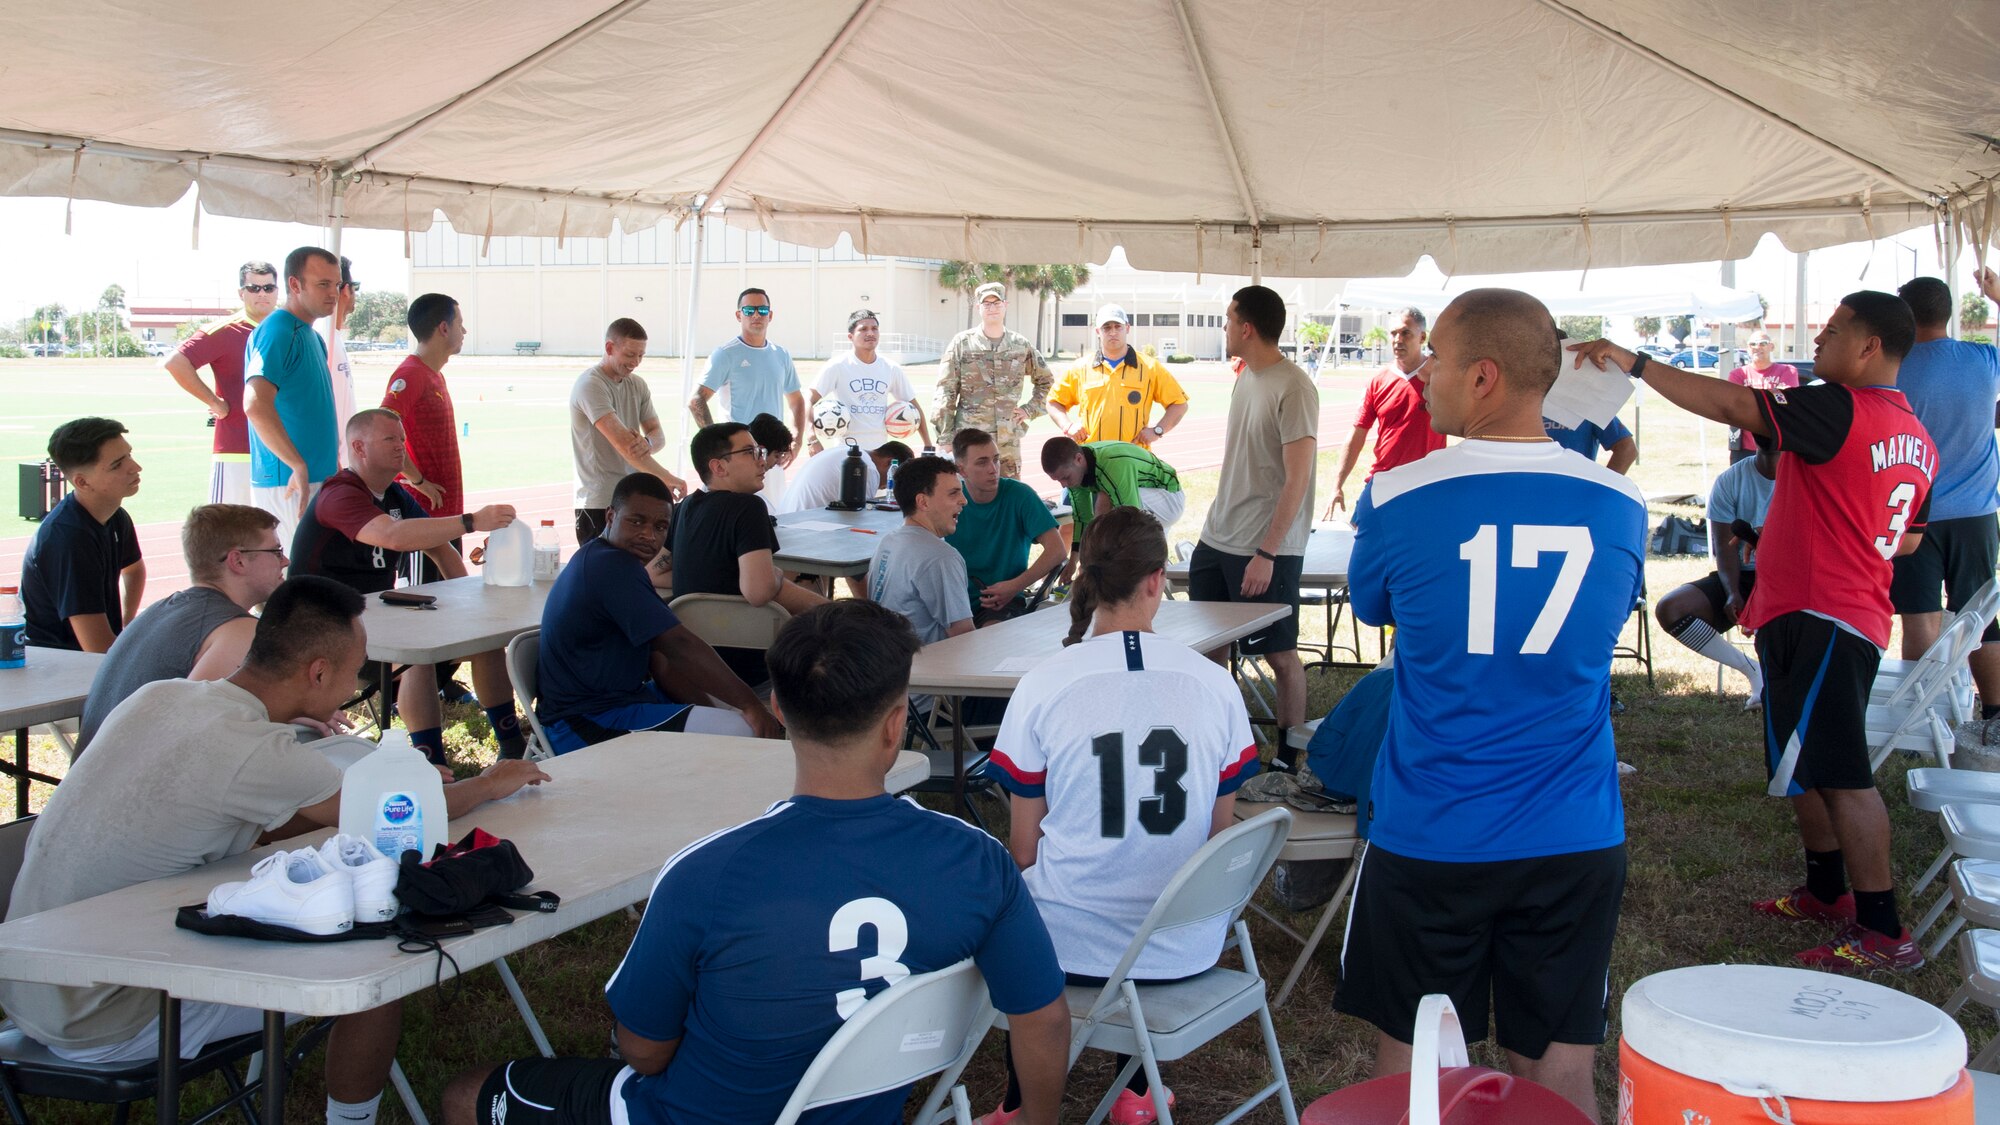 Soccer Tournament participants receive instructions prior to the start of MacDill’s first Hispanic Heritage Soccer Tournament, Oct. 4, 2019, at MacDill Air Force Base, Fla. The Hispanic Heritage Committee hosted their first Hispanic Heritage Month Soccer Tournament, in an effort to introduce Team MacDill to a piece of Hispanic Culture. (U.S. Air Force photo by Airman 1st Class Shannon Bowman)